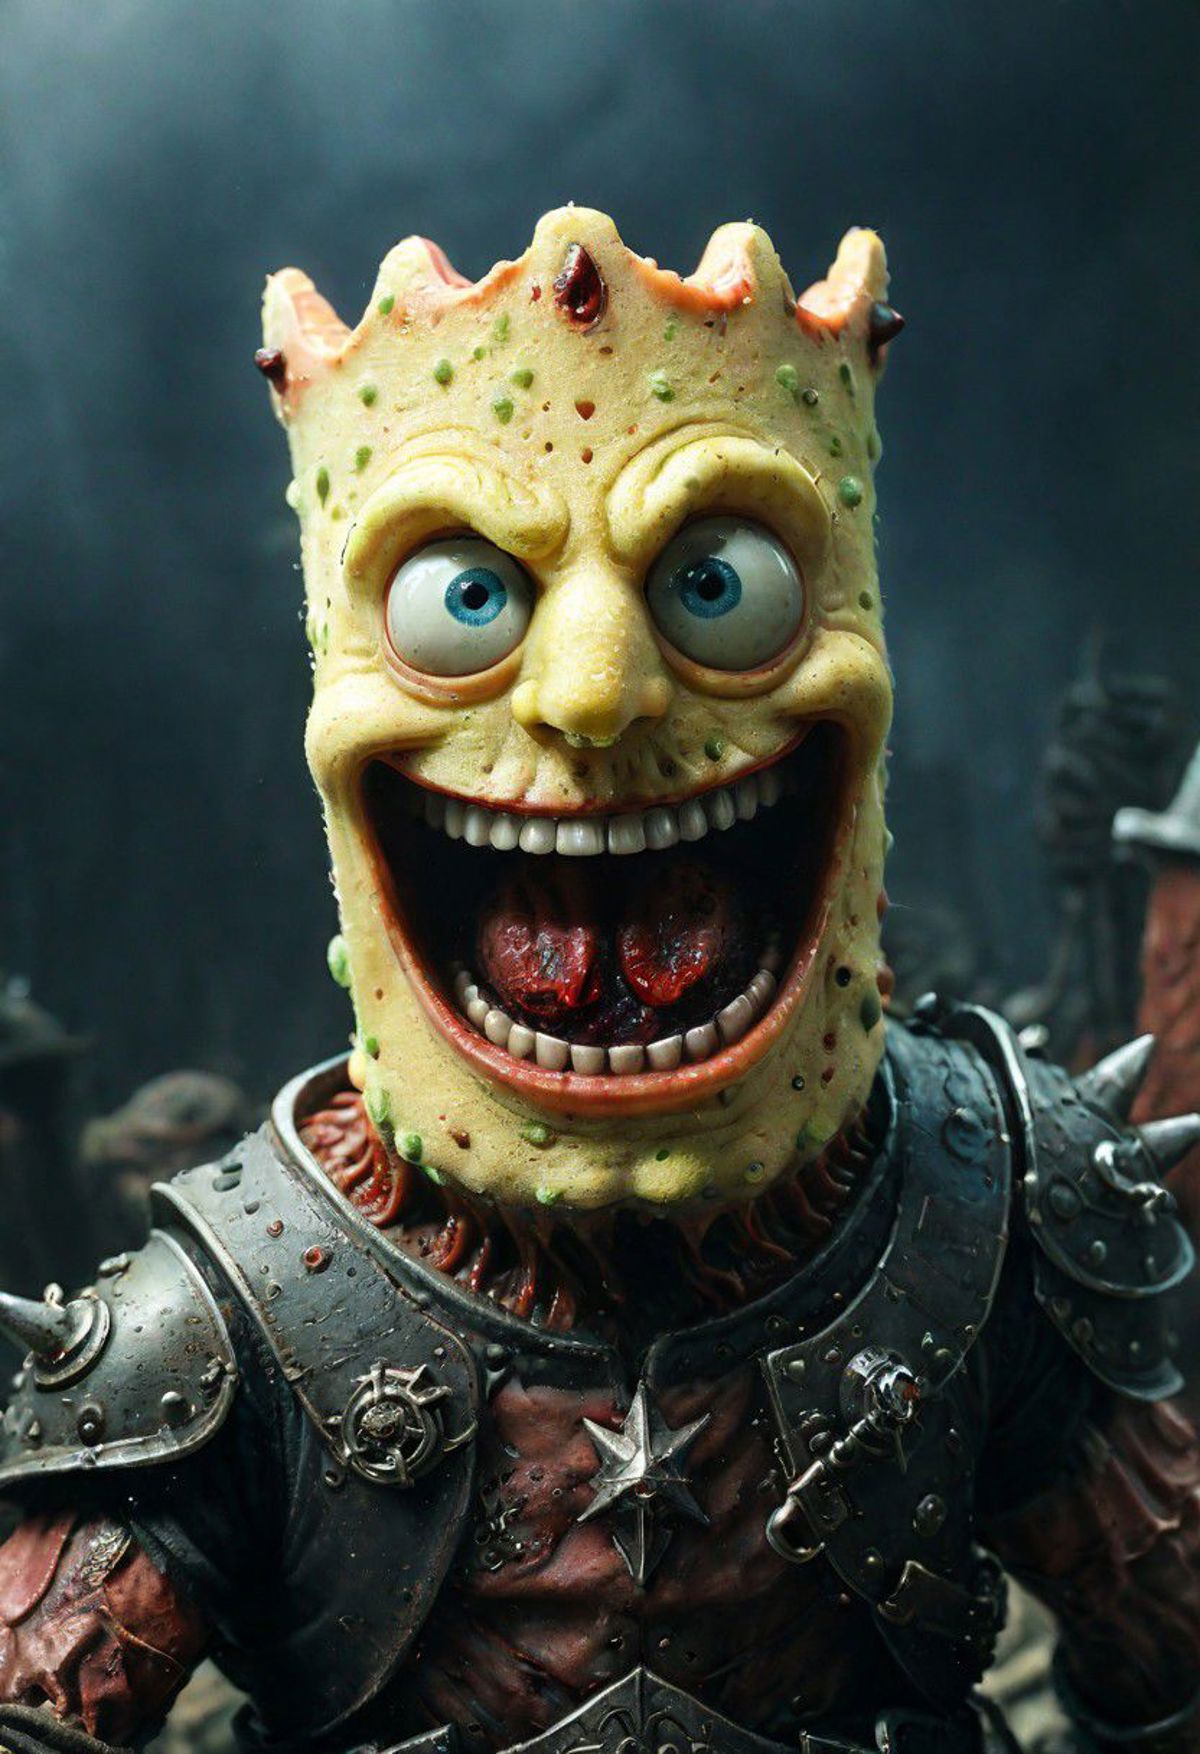 A creepy, smiling, blue-eyed, yellow demon or monster head.